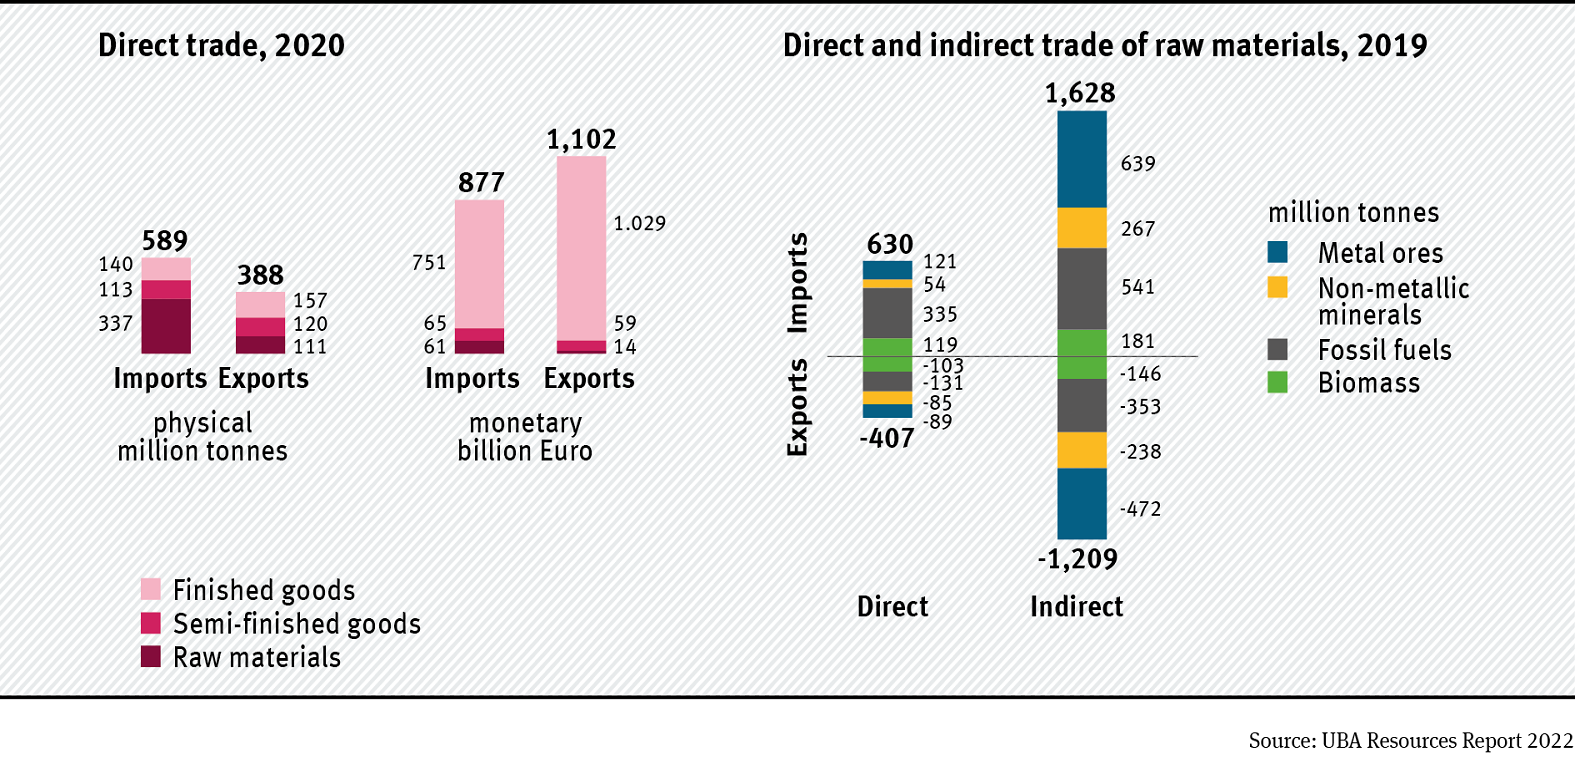 Germany benefits from global trade